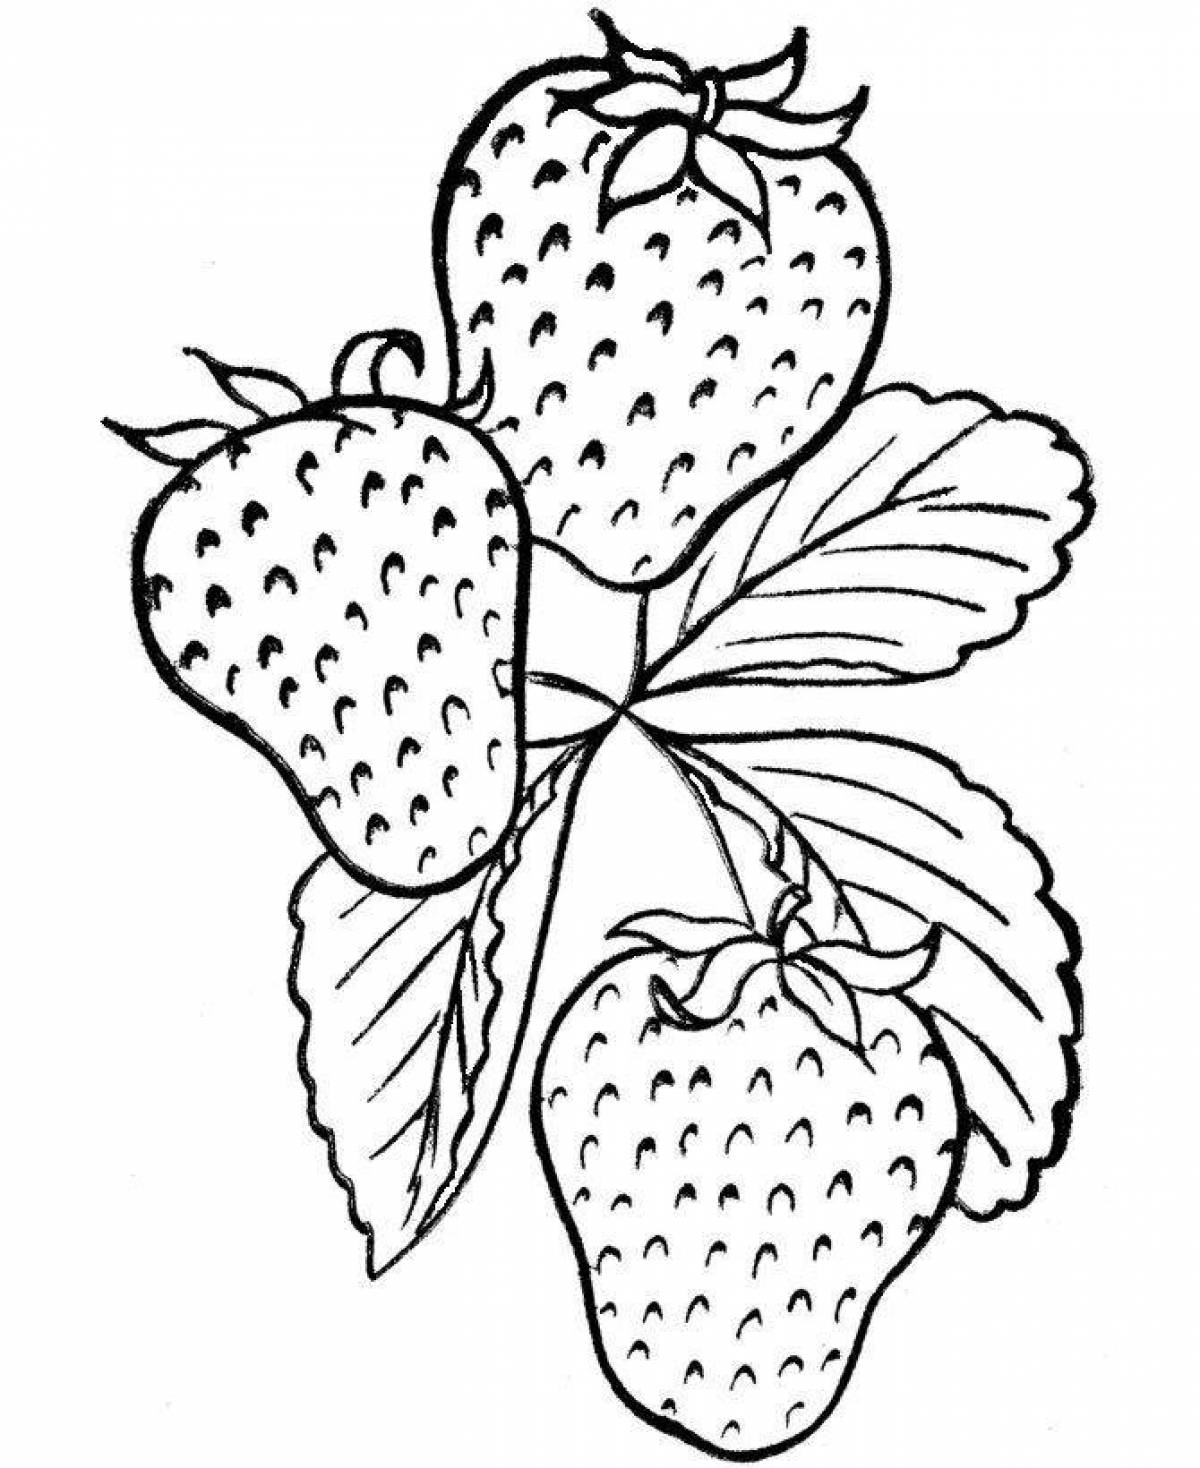 Friendly fruit and vegetable coloring book